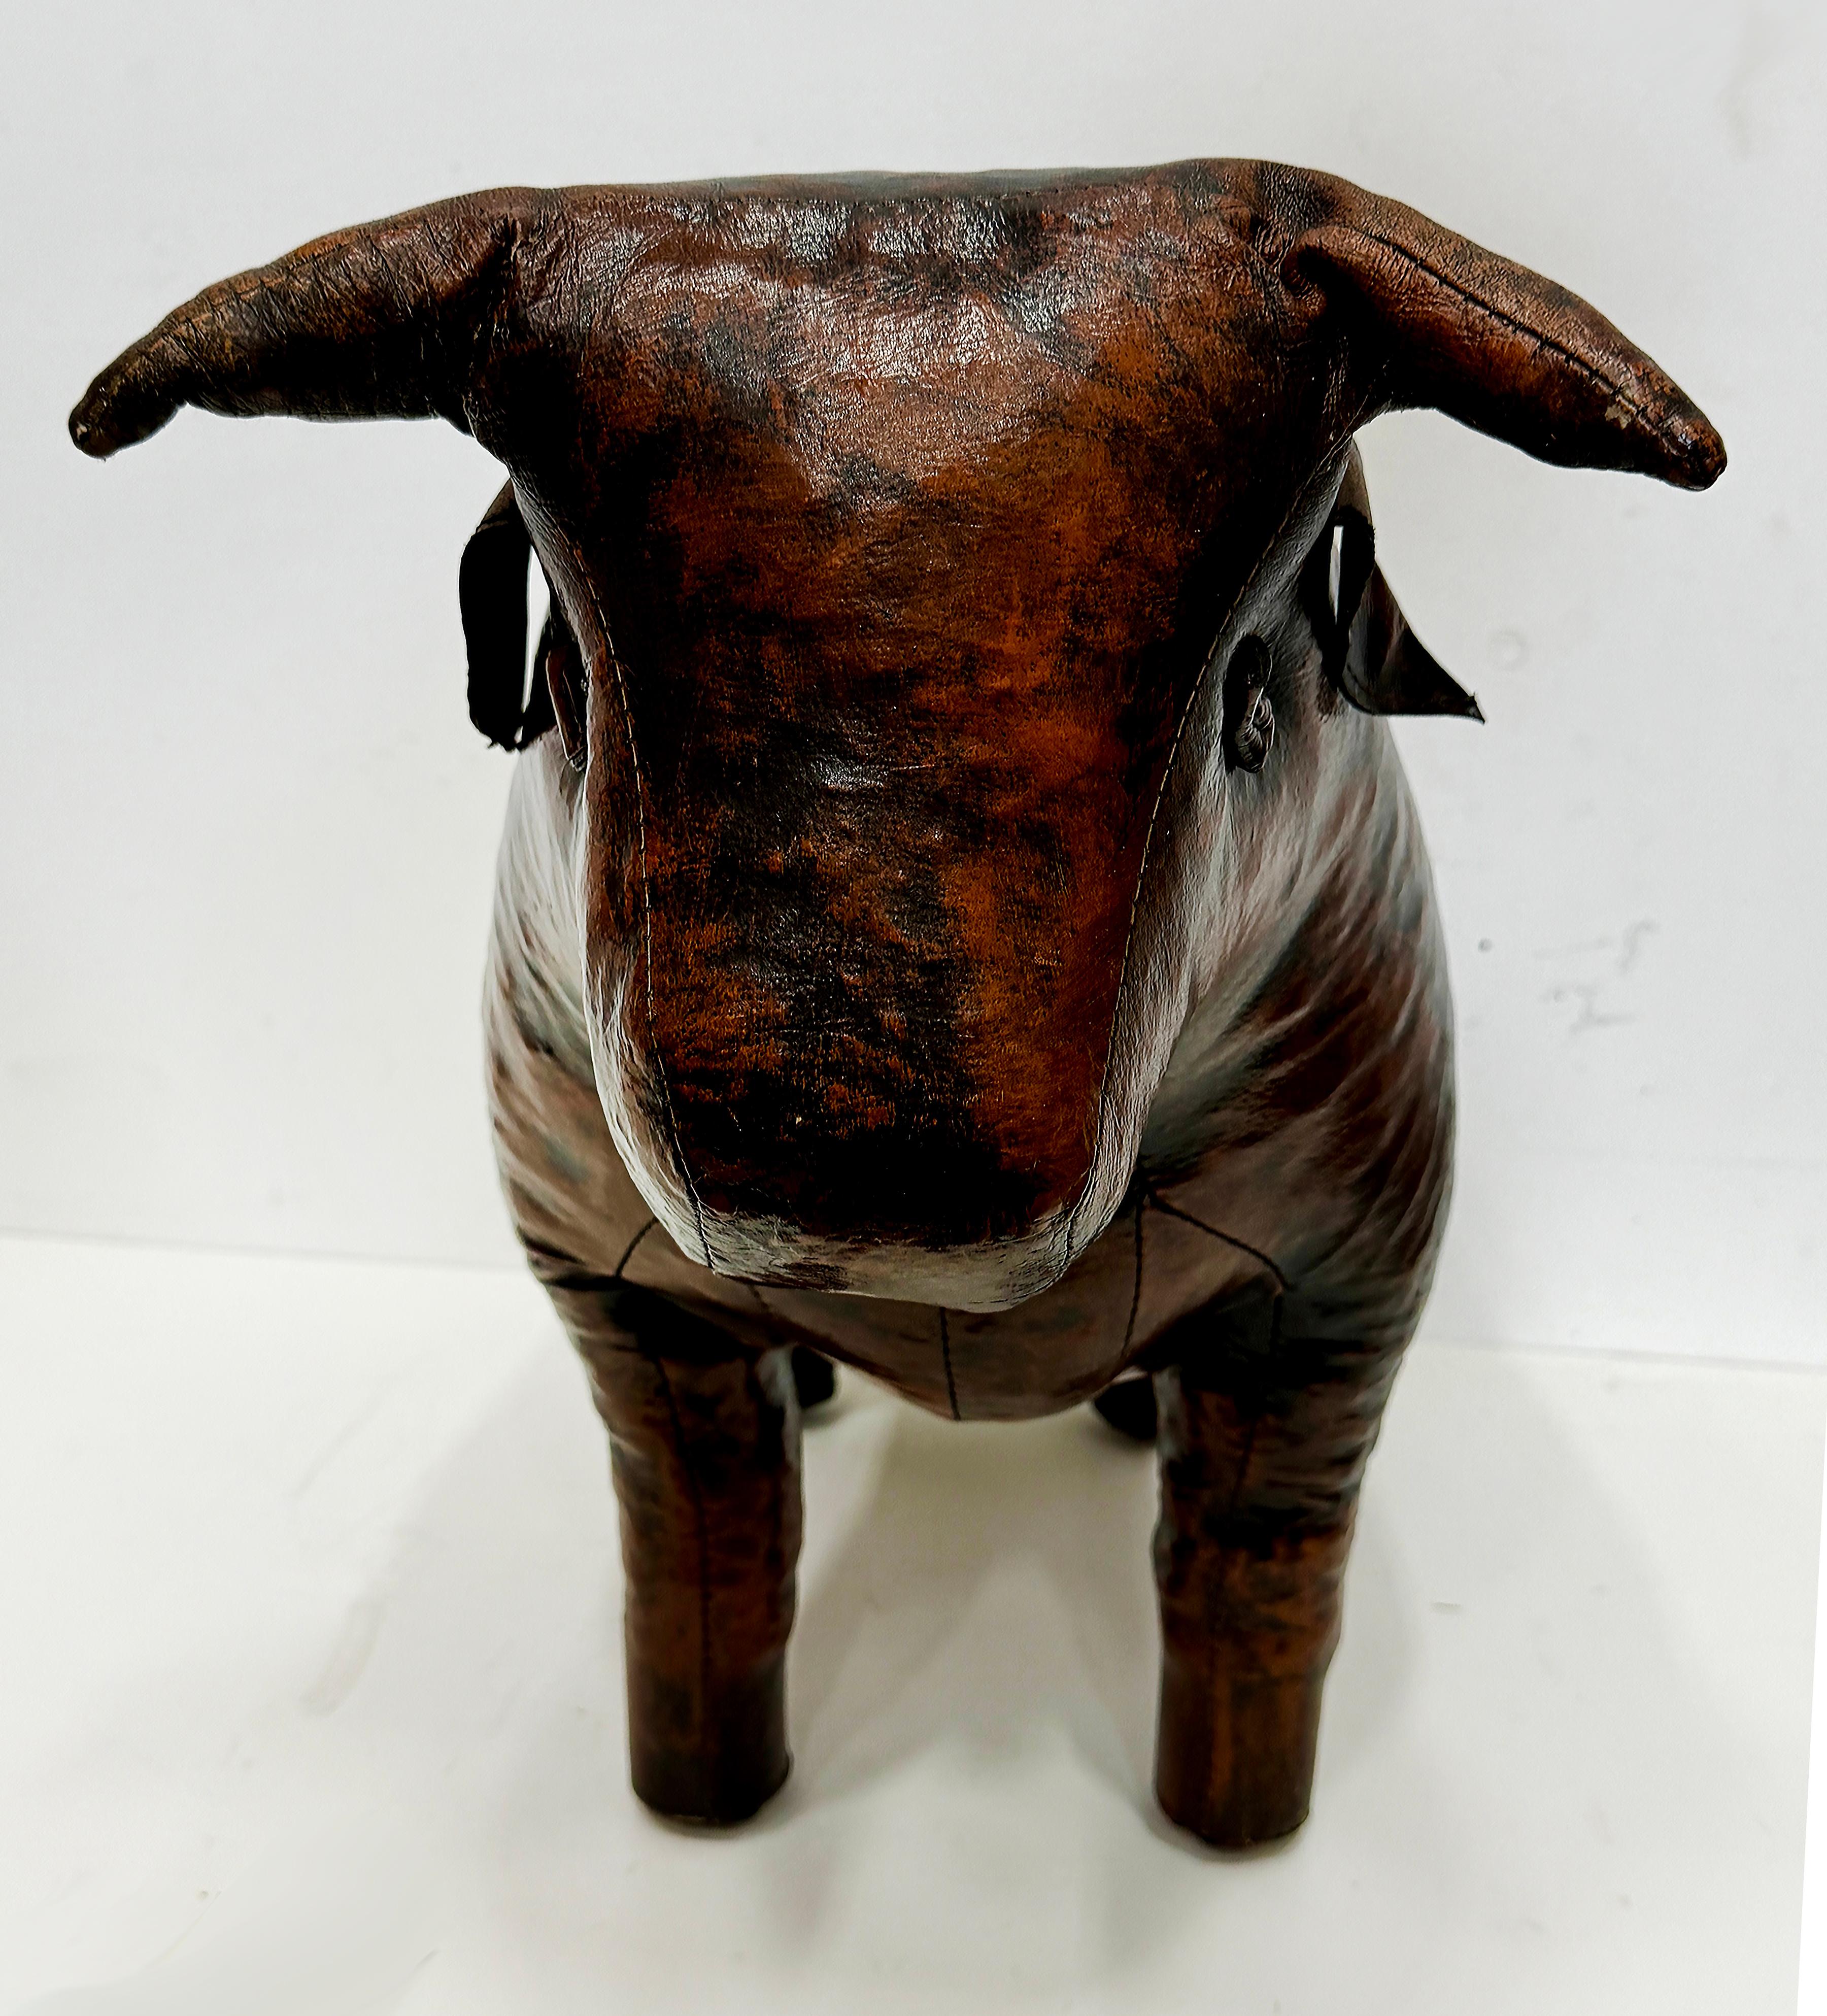  Mid-century Dimitri Omersa for Valenti Home Bull Ottoman

Offered for sale is a vintage cowhide-leather bull ottoman or footstool by Dimitri Omersa (1927-1975) for Valenti Home.  Why give home to a ubiquitous Abercrombie and Fitch hippopotamus when